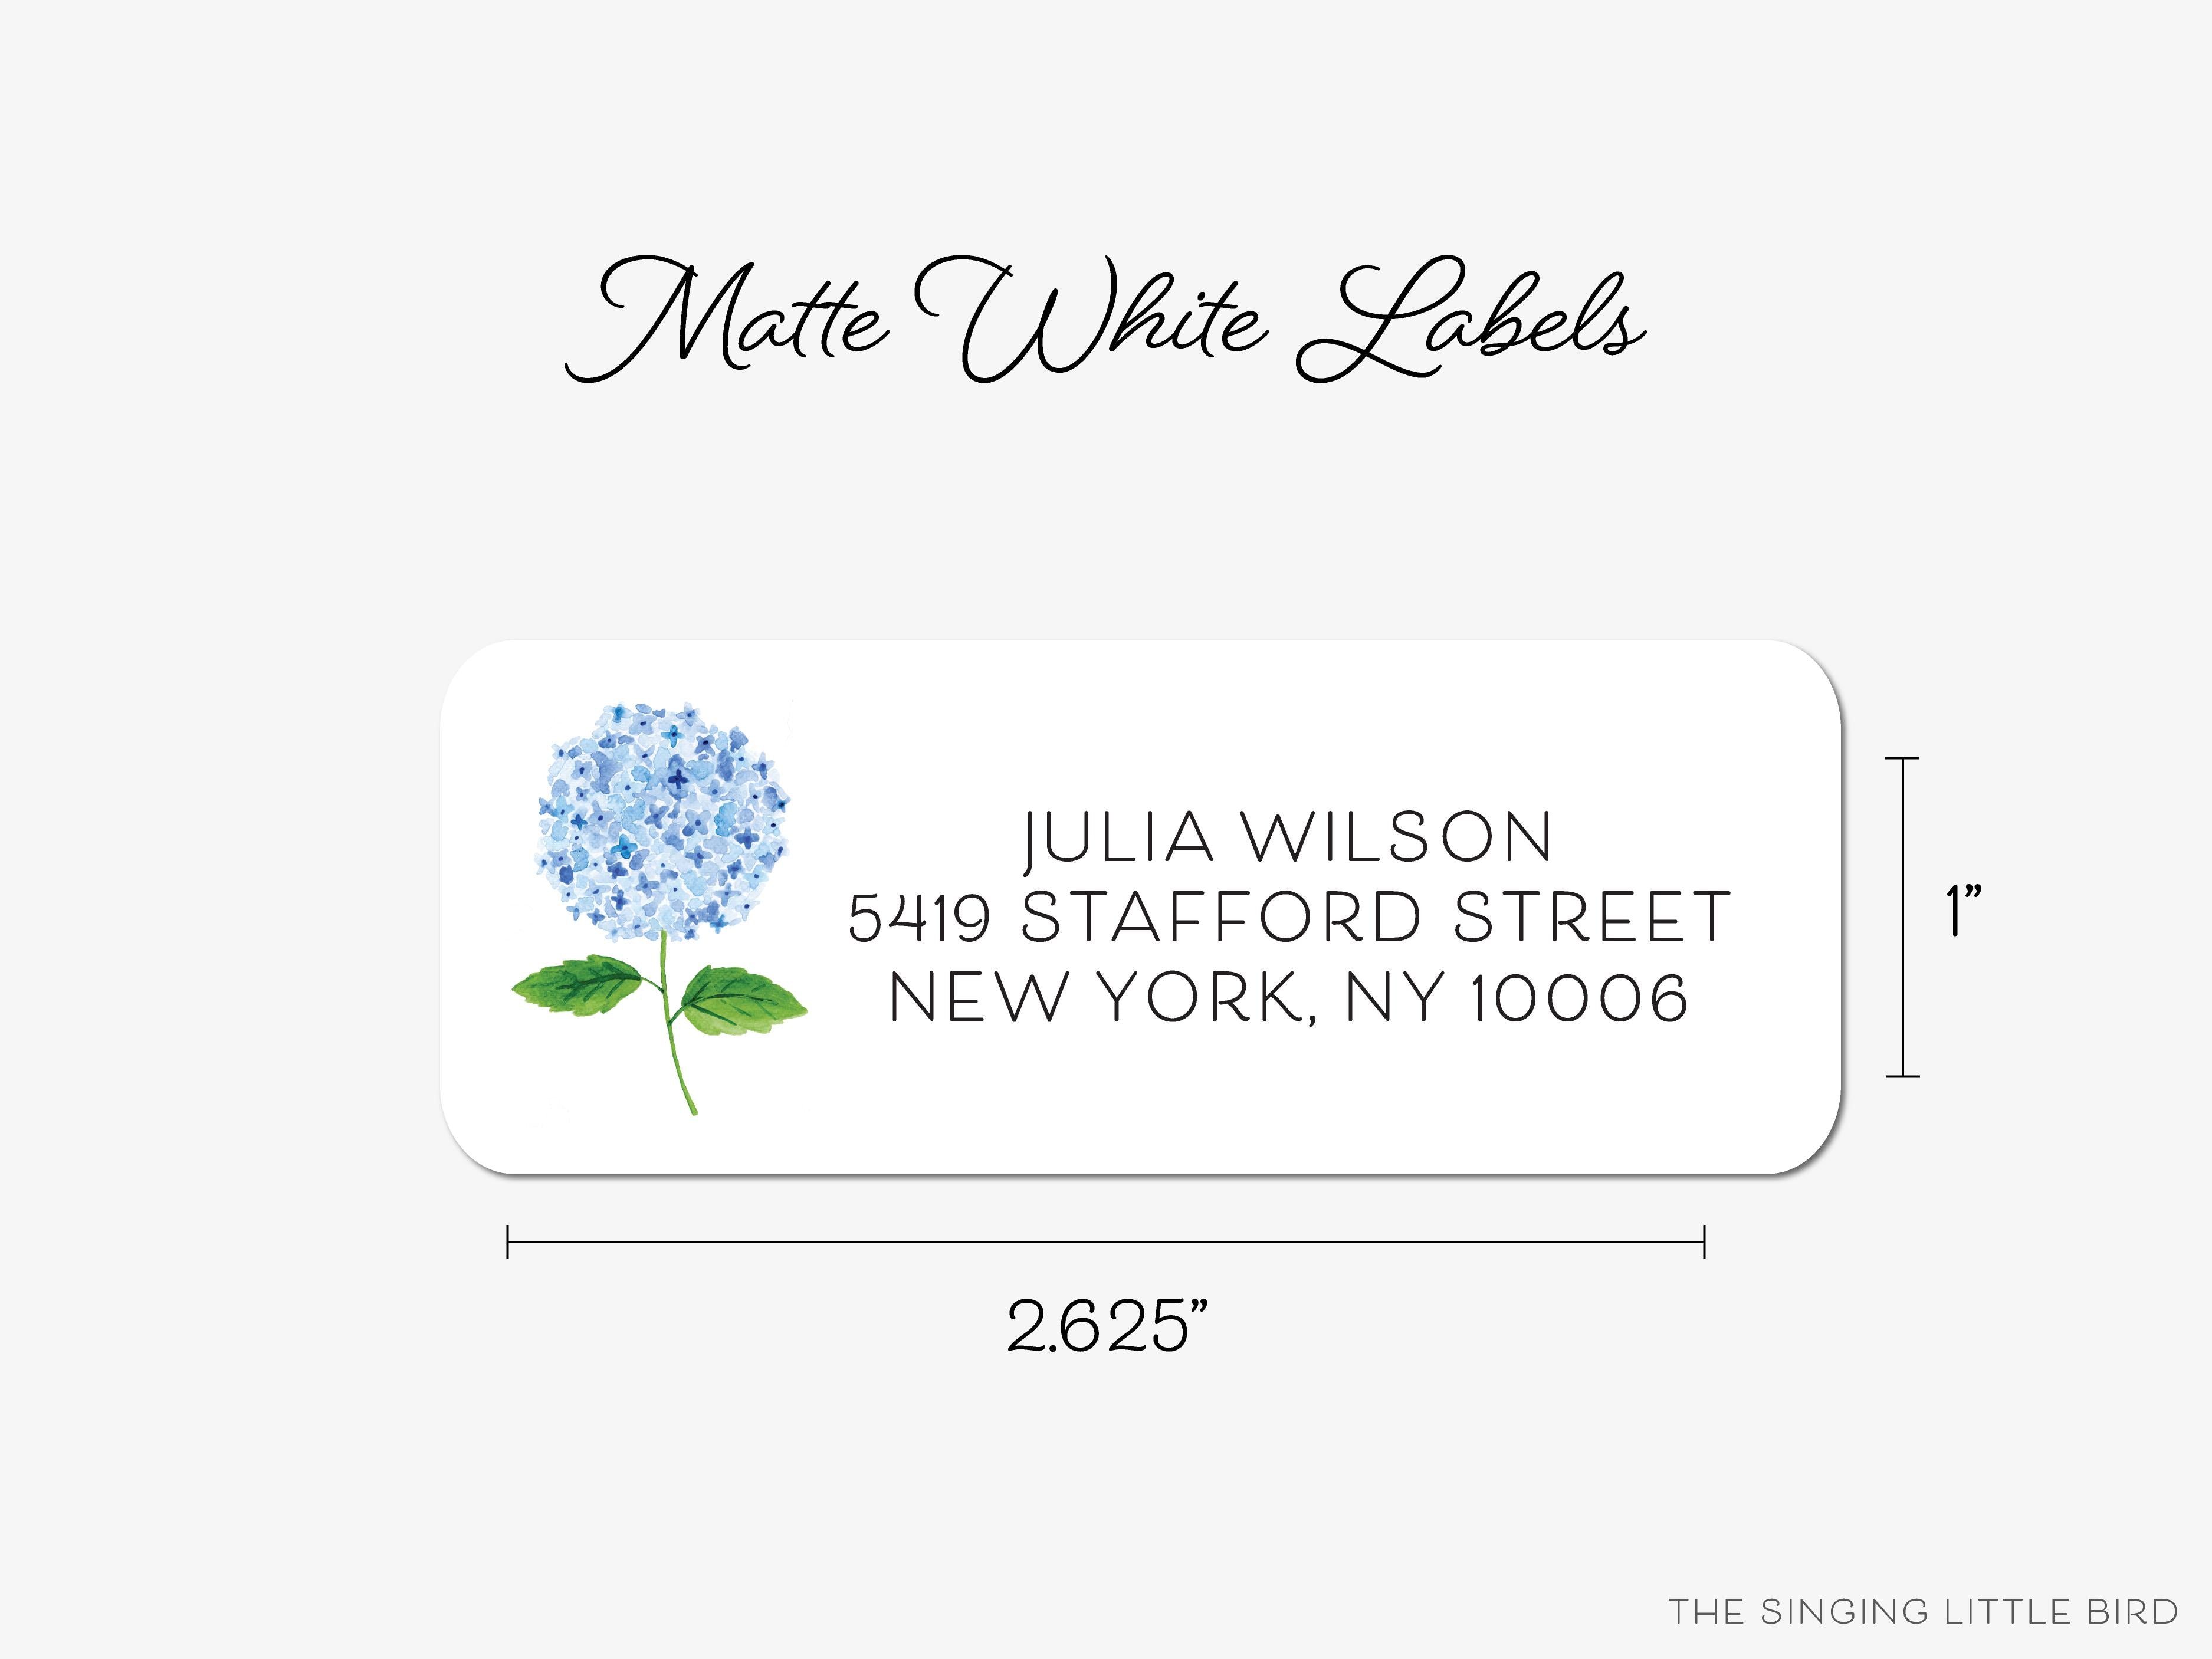 Hydrangea Return Address Labels-These personalized return address labels are 2.625" x 1" and feature our hand-painted watercolor Hydrangea, printed in the USA on beautiful matte finish labels. These make great gifts for yourself or the floral lover.-The Singing Little Bird